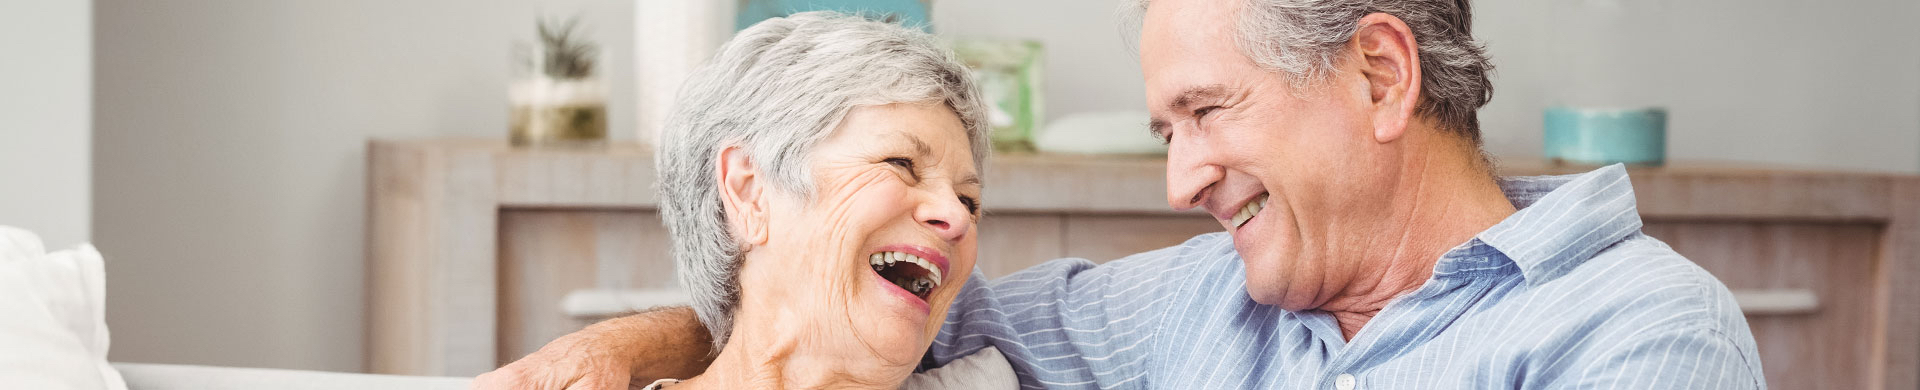 A senior man wraps his arms around a senior woman and they both laugh the smile at each other